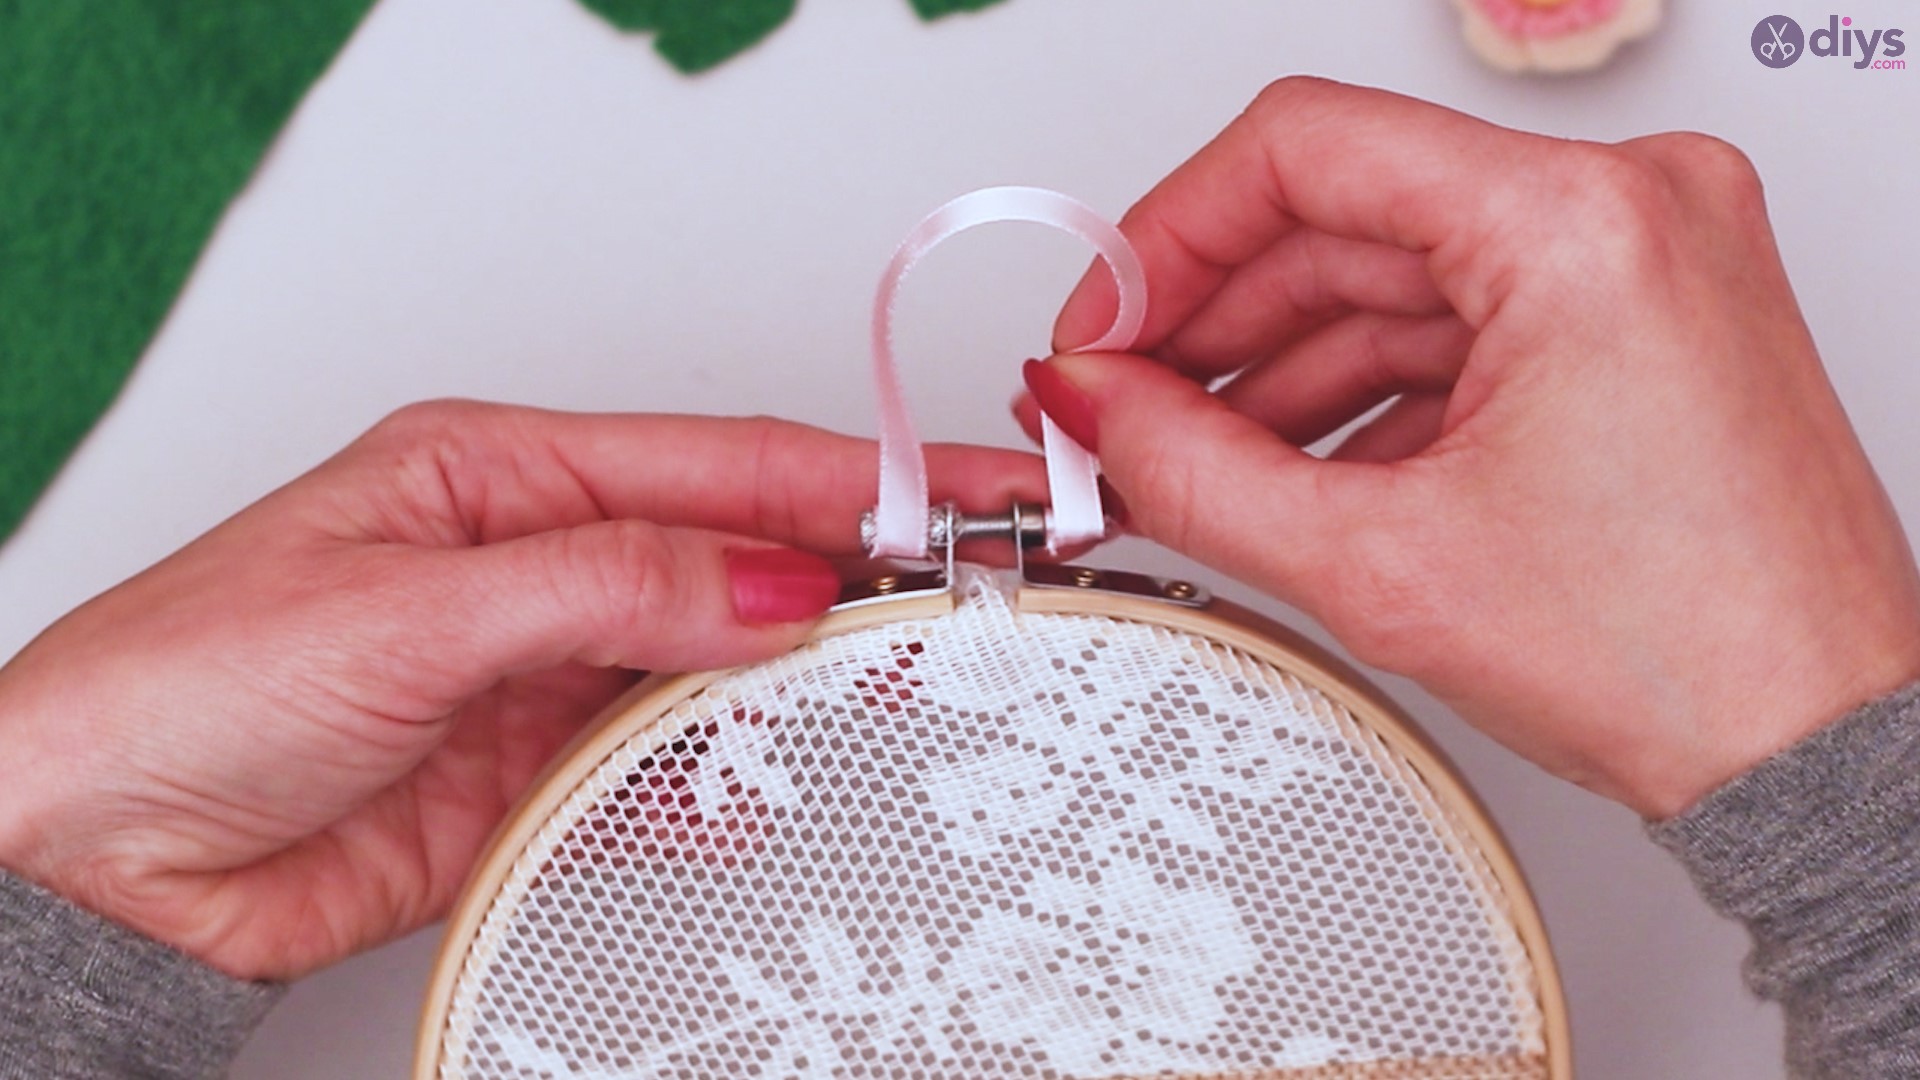 Diy embroidery hoop wall decor tutorial step by step (57)